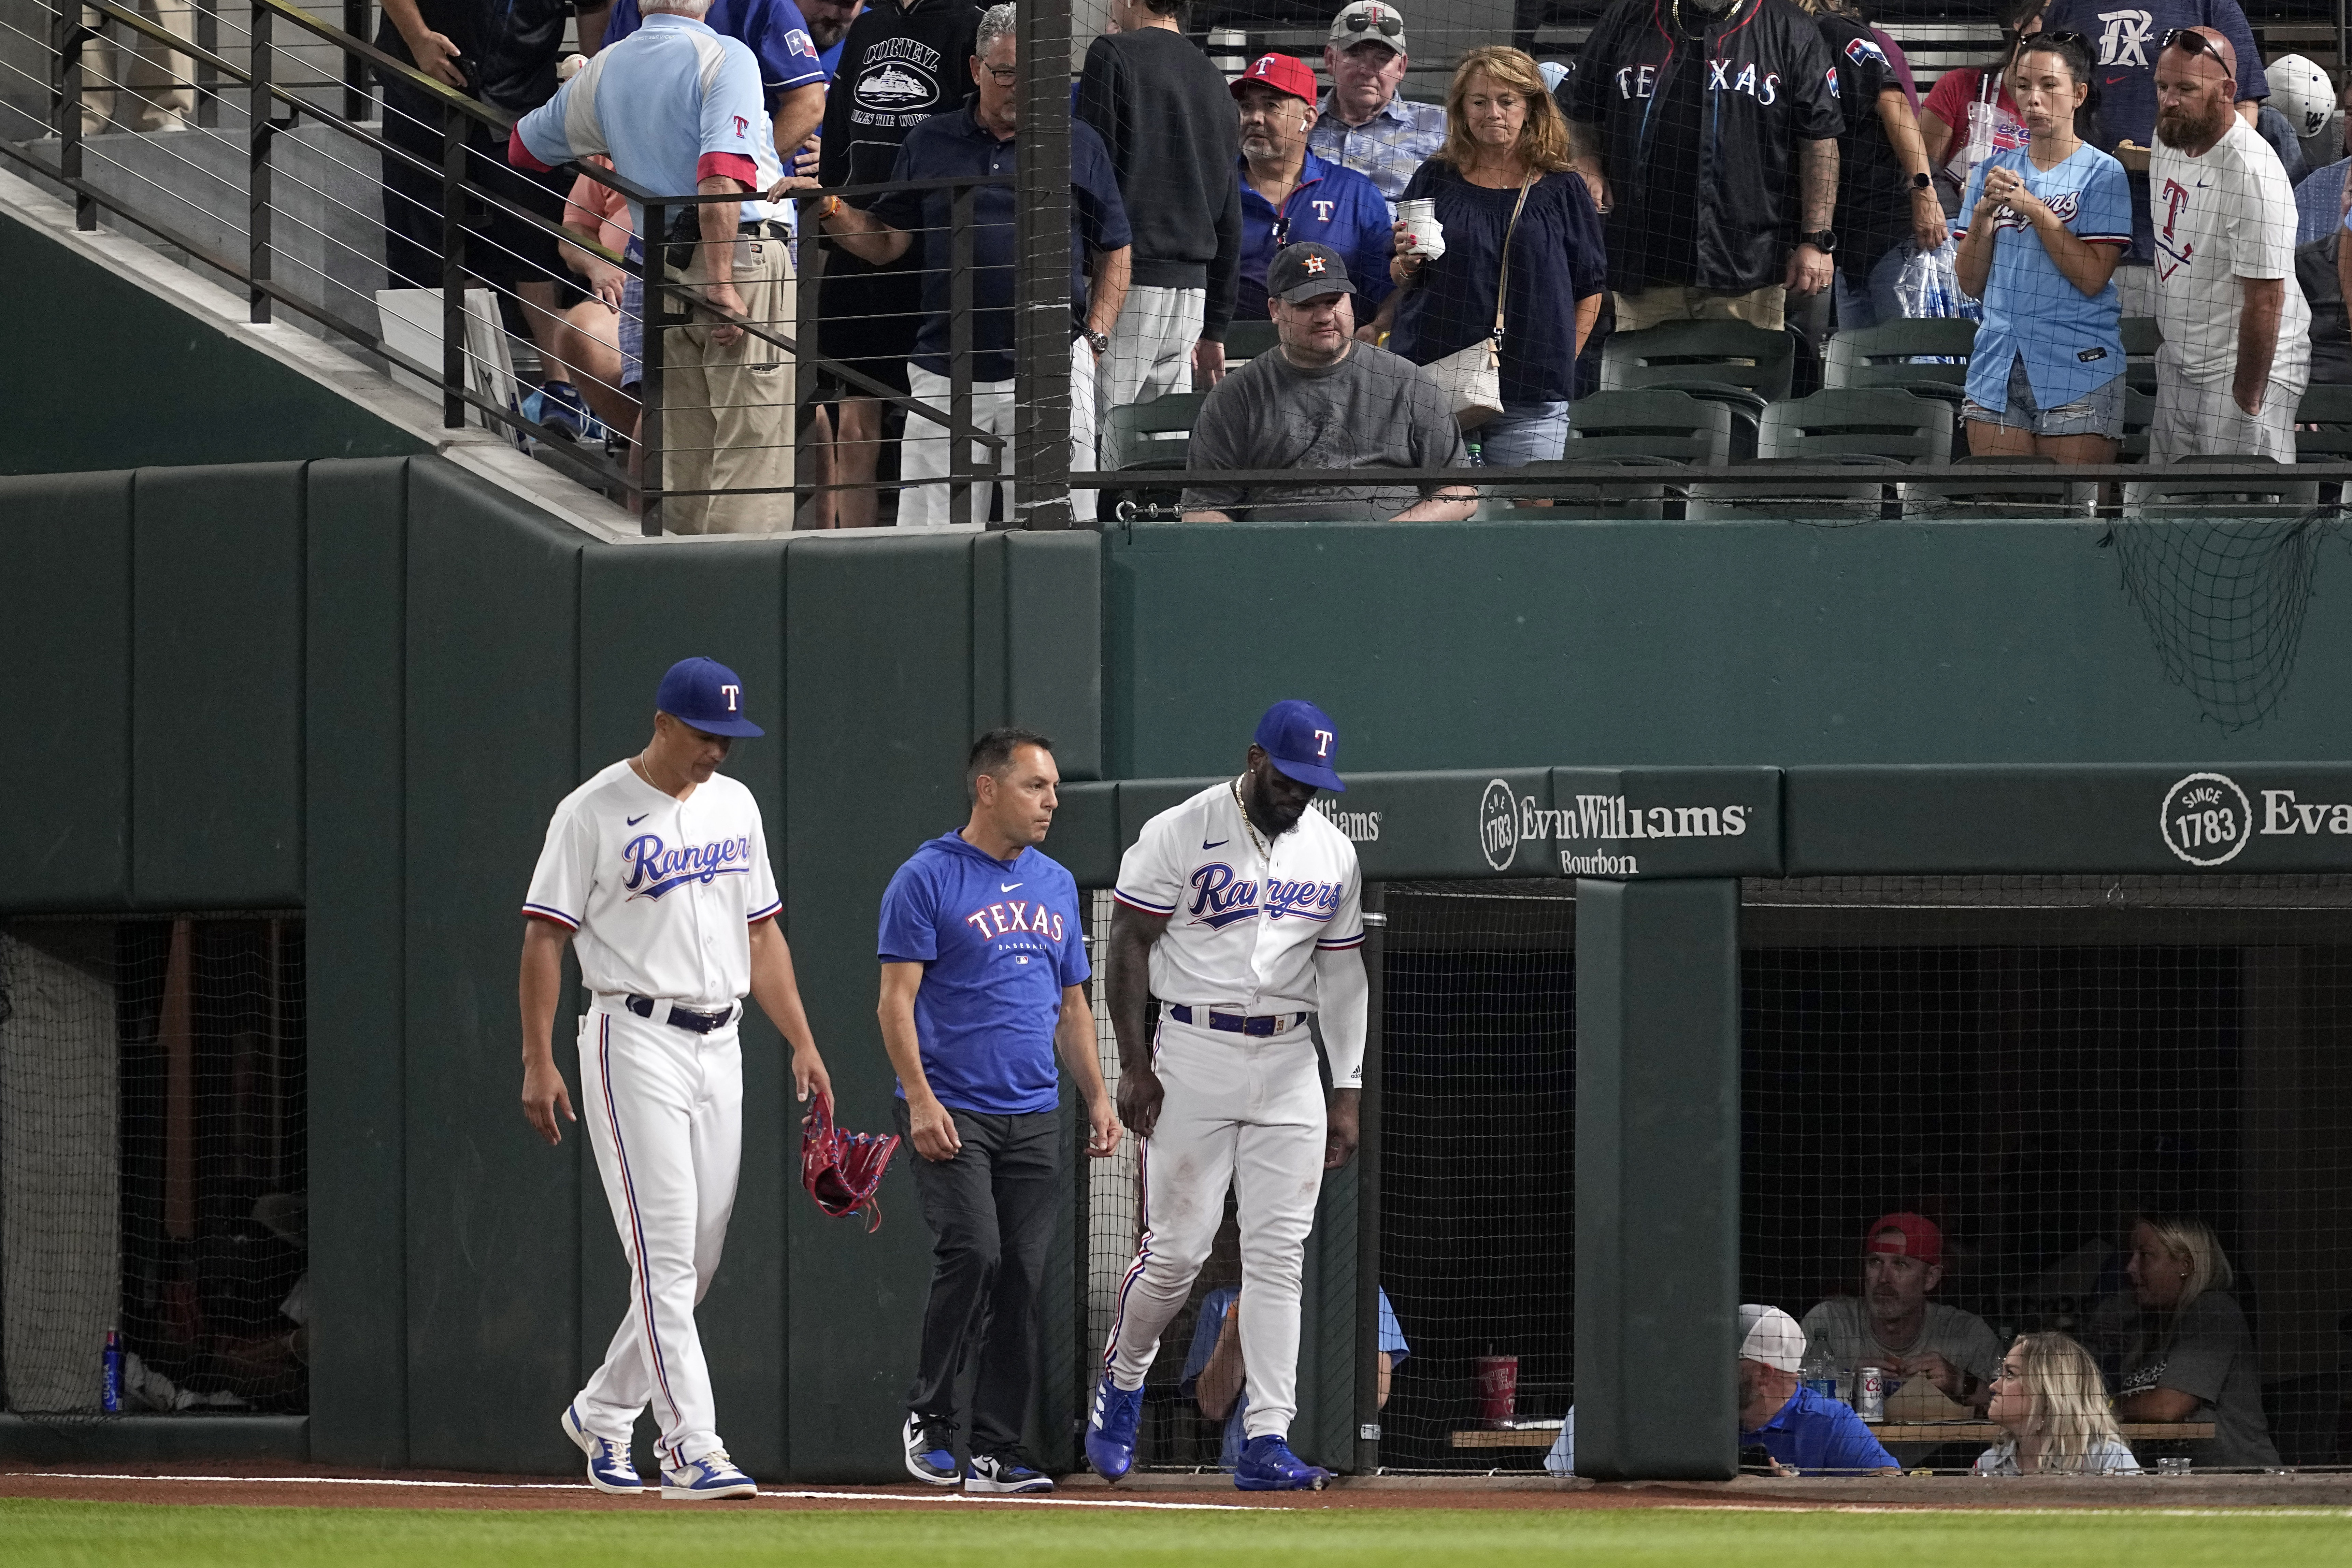 Adolis Garcia of the Texas Rangers rounds the bases after hitting a News  Photo - Getty Images